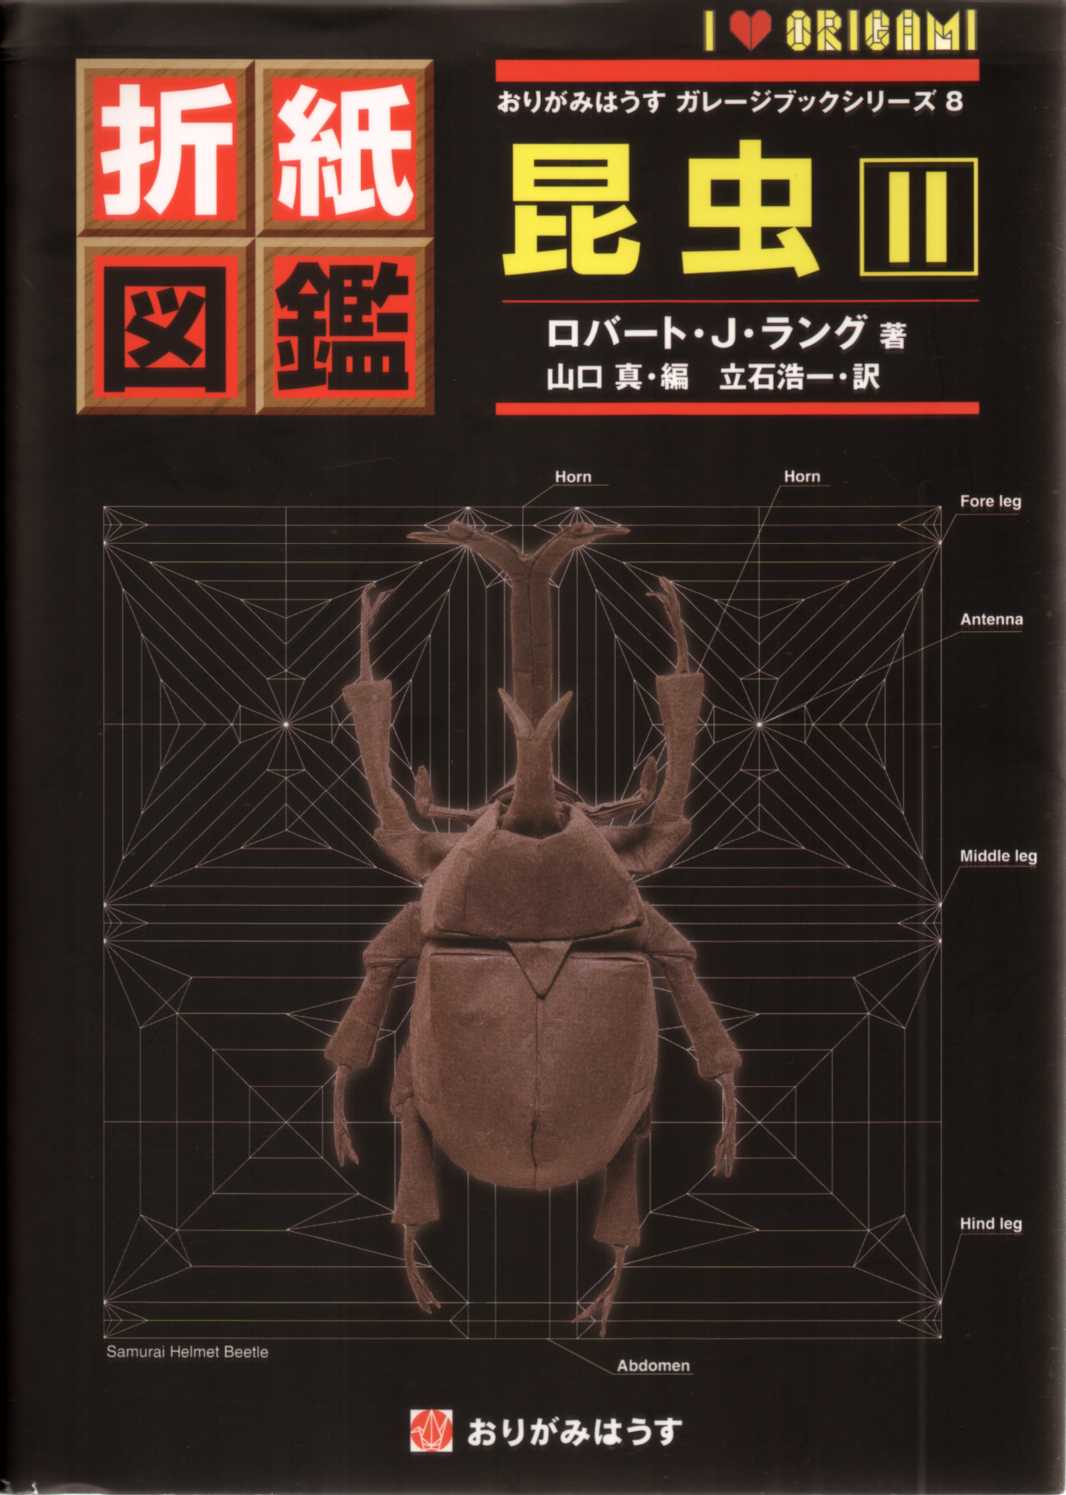 Origami Insects II / 折紙図鑑　昆虫・2 : page 76.